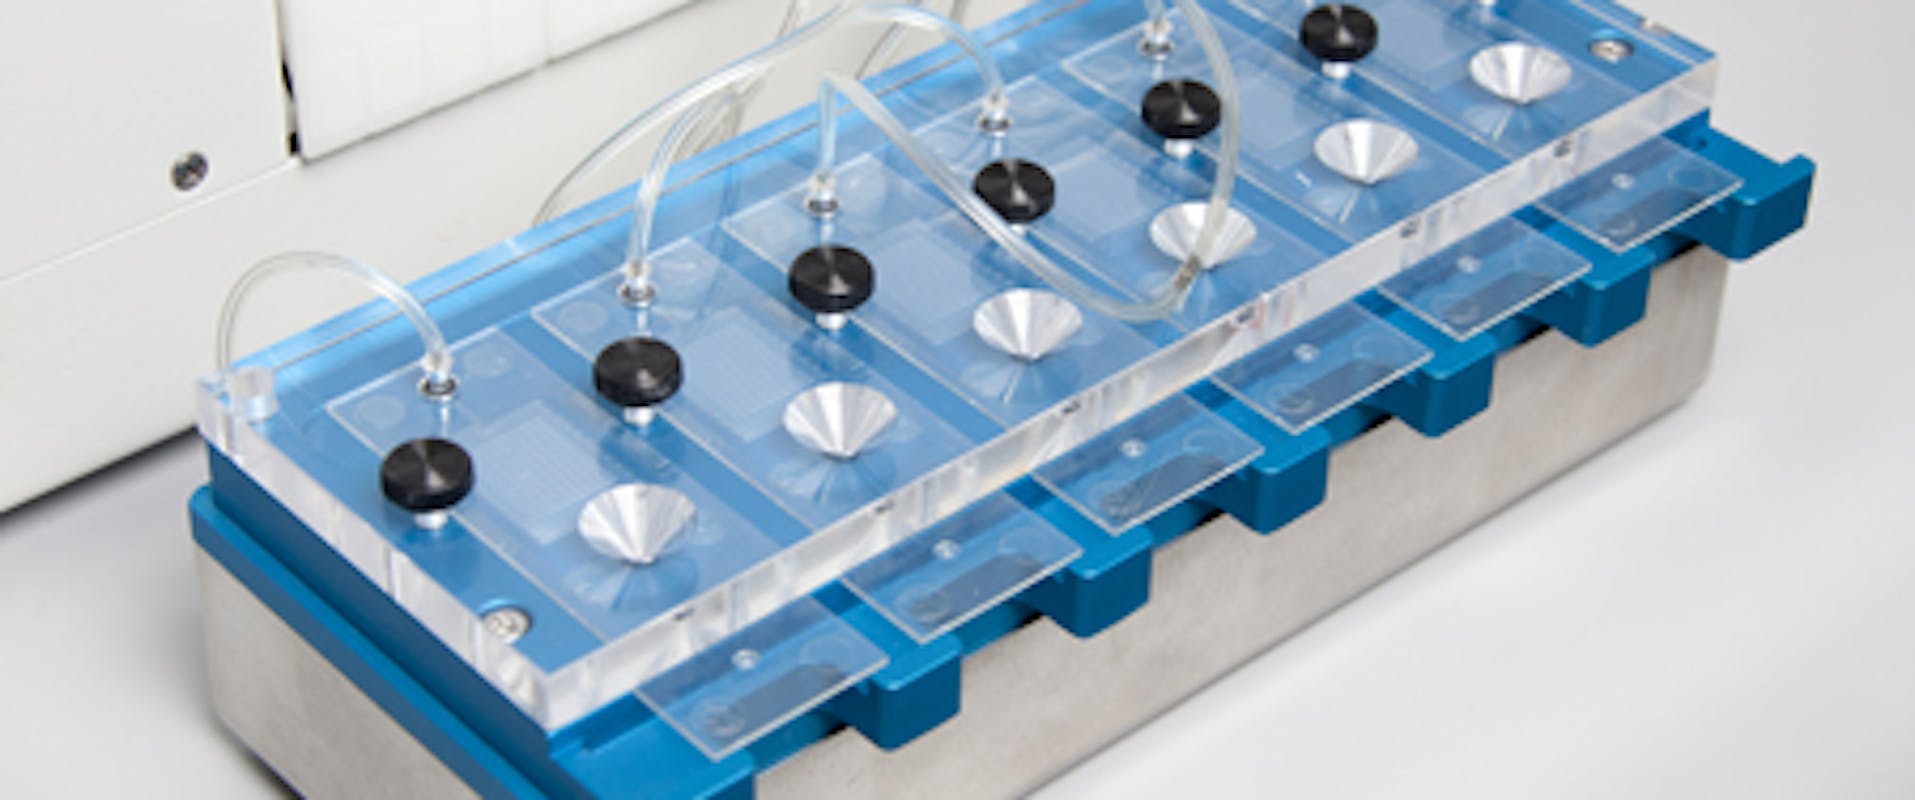 Prototype of the bioanalytical fluidic system